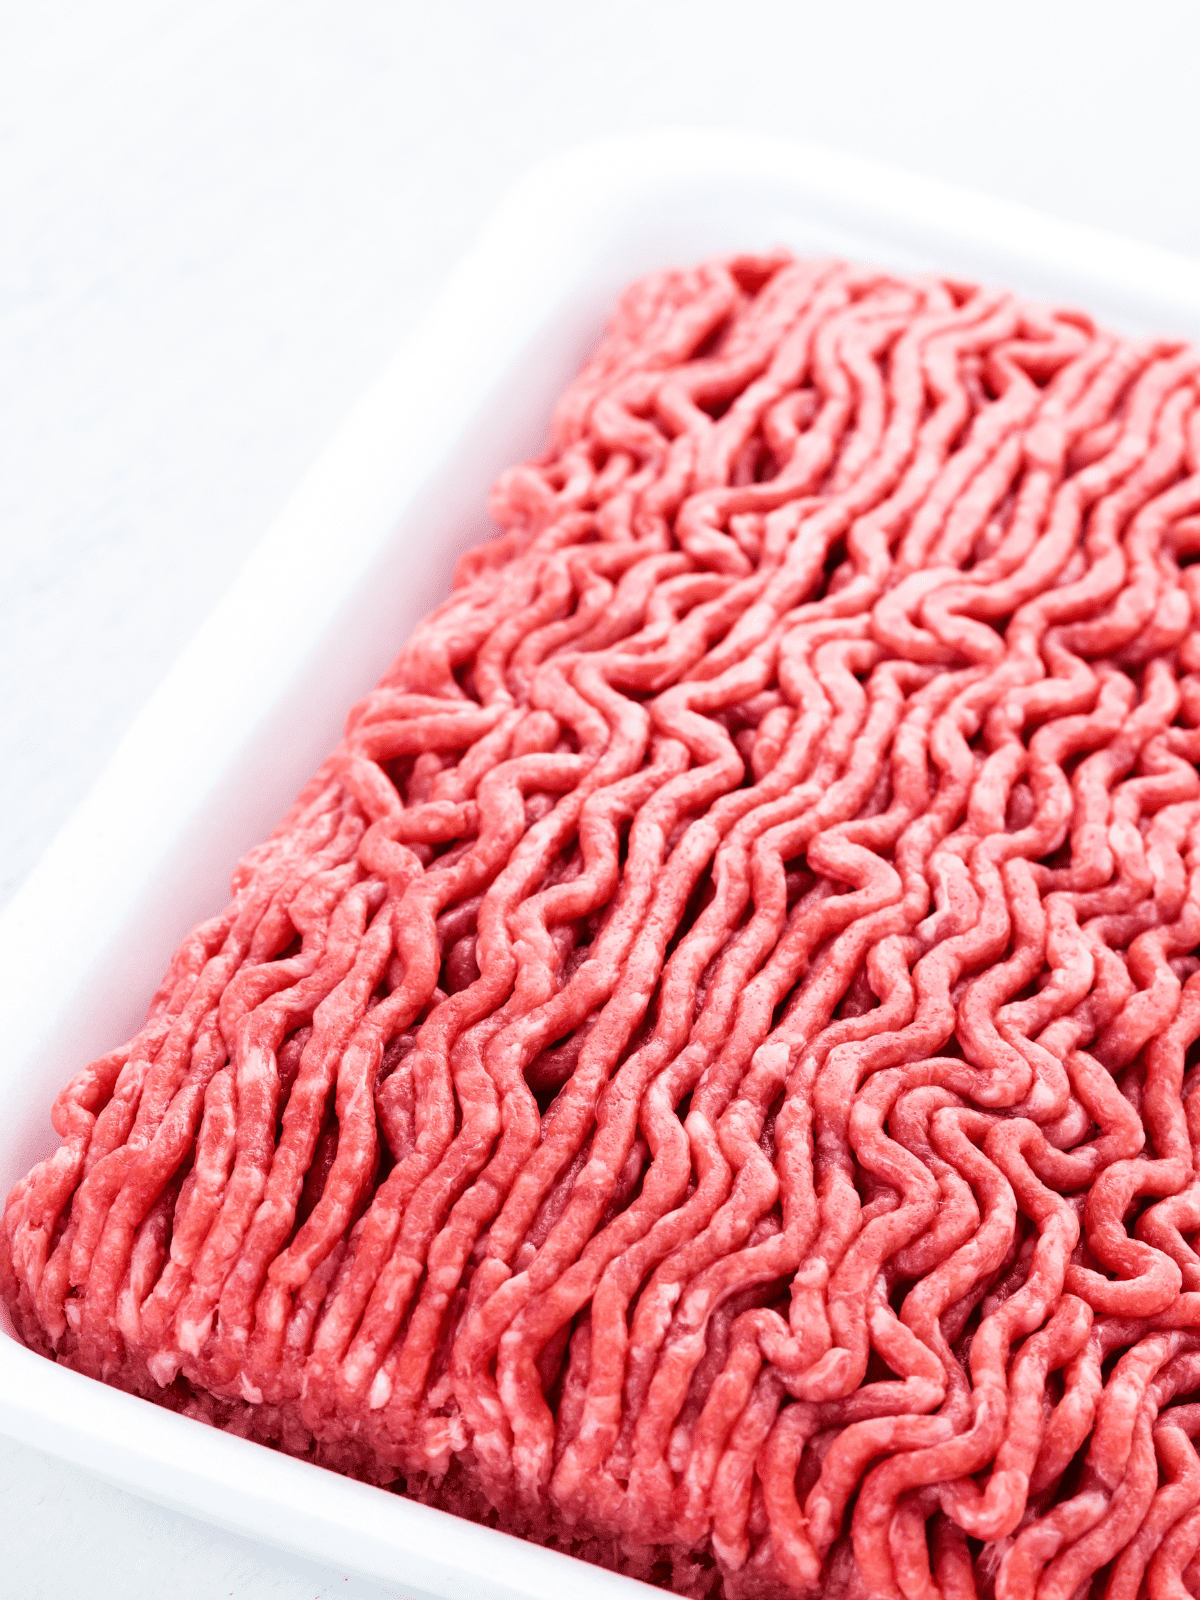 Ground beef raw in a package.